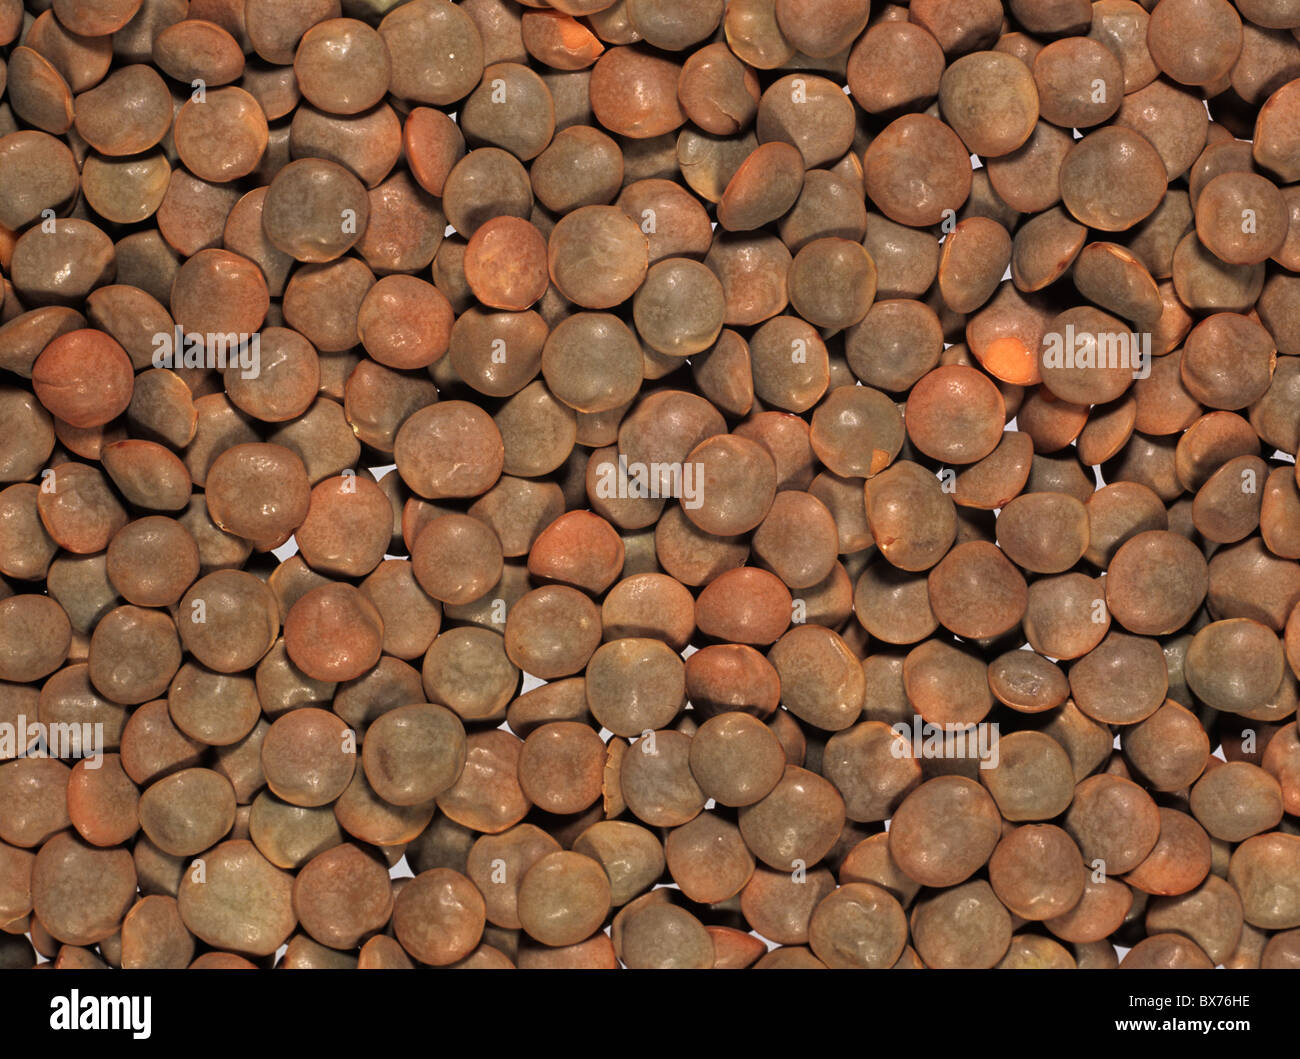 Brown lentils (Lens culinaris) prepared for cooking, produce of Turkey Stock Photo